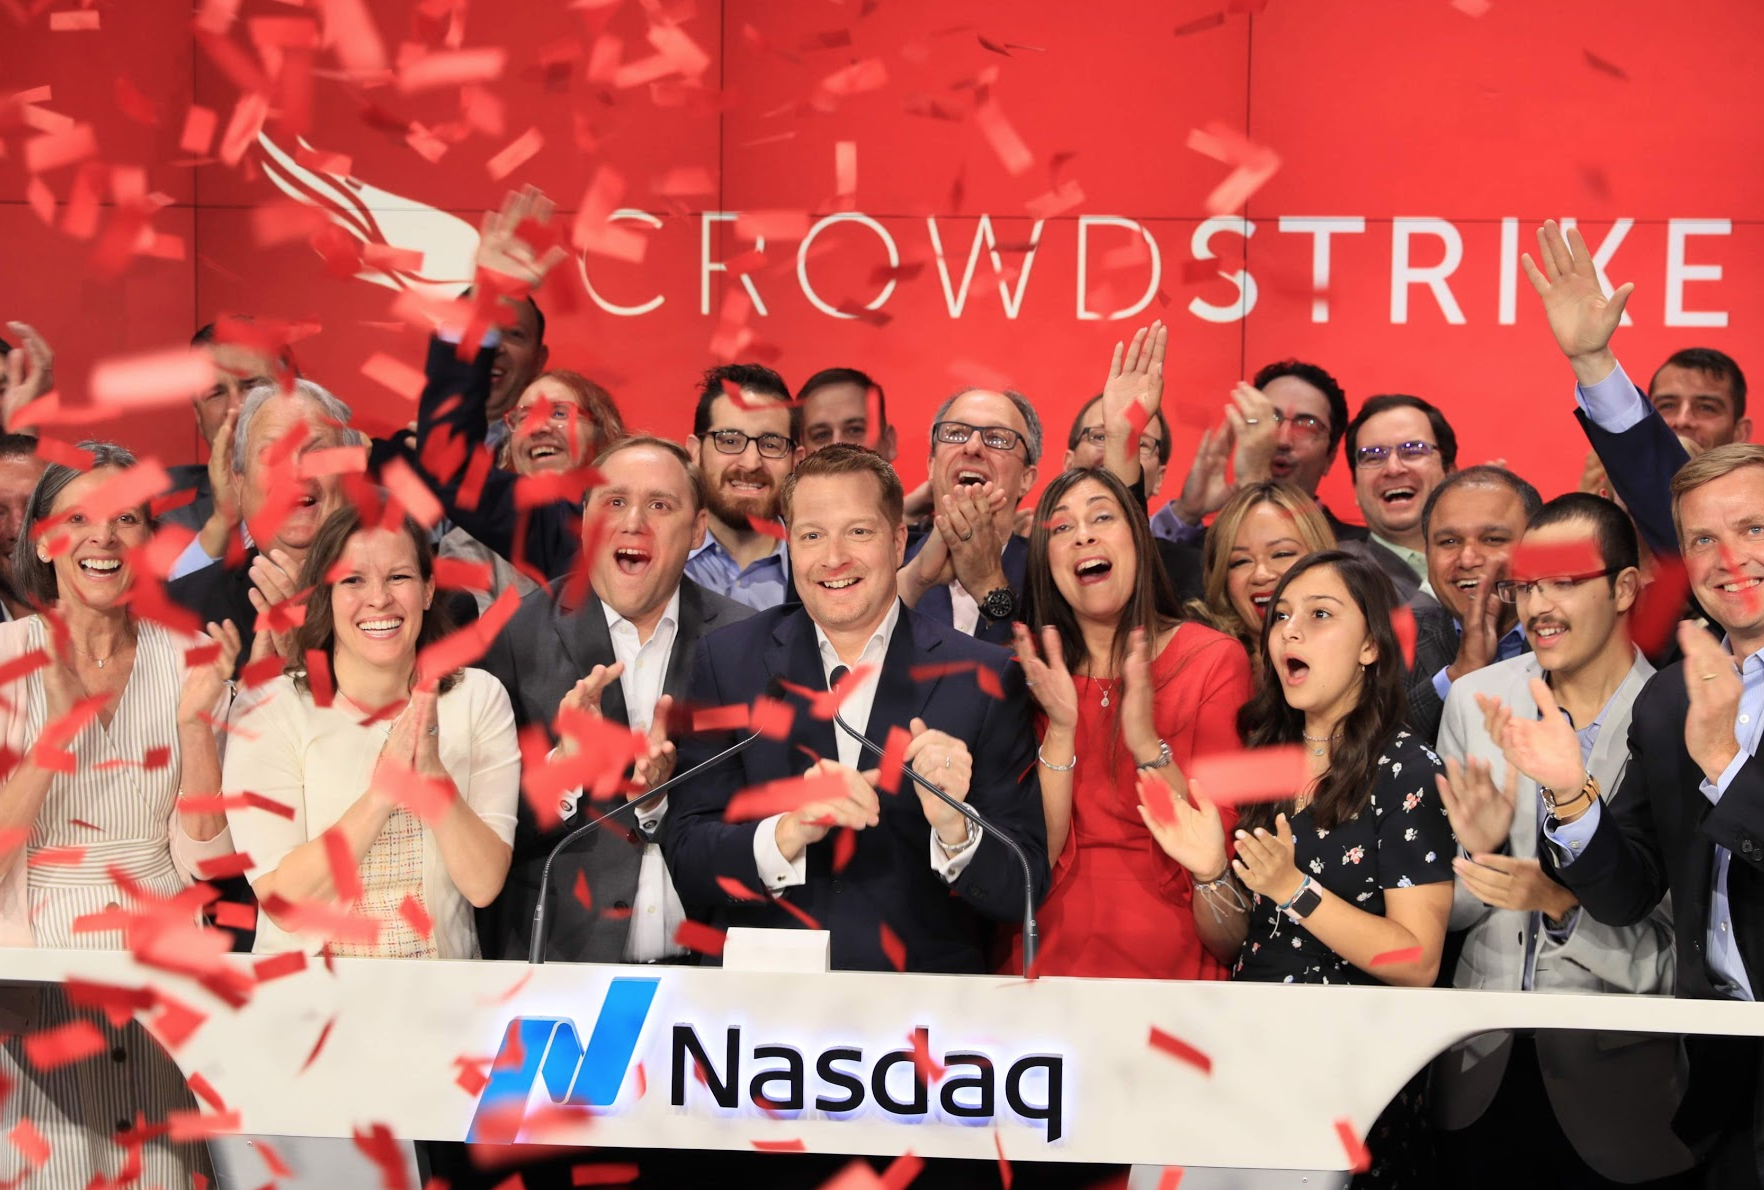 CrowdStrike: Pioneering Cybersecurity Through Innovation and Protection